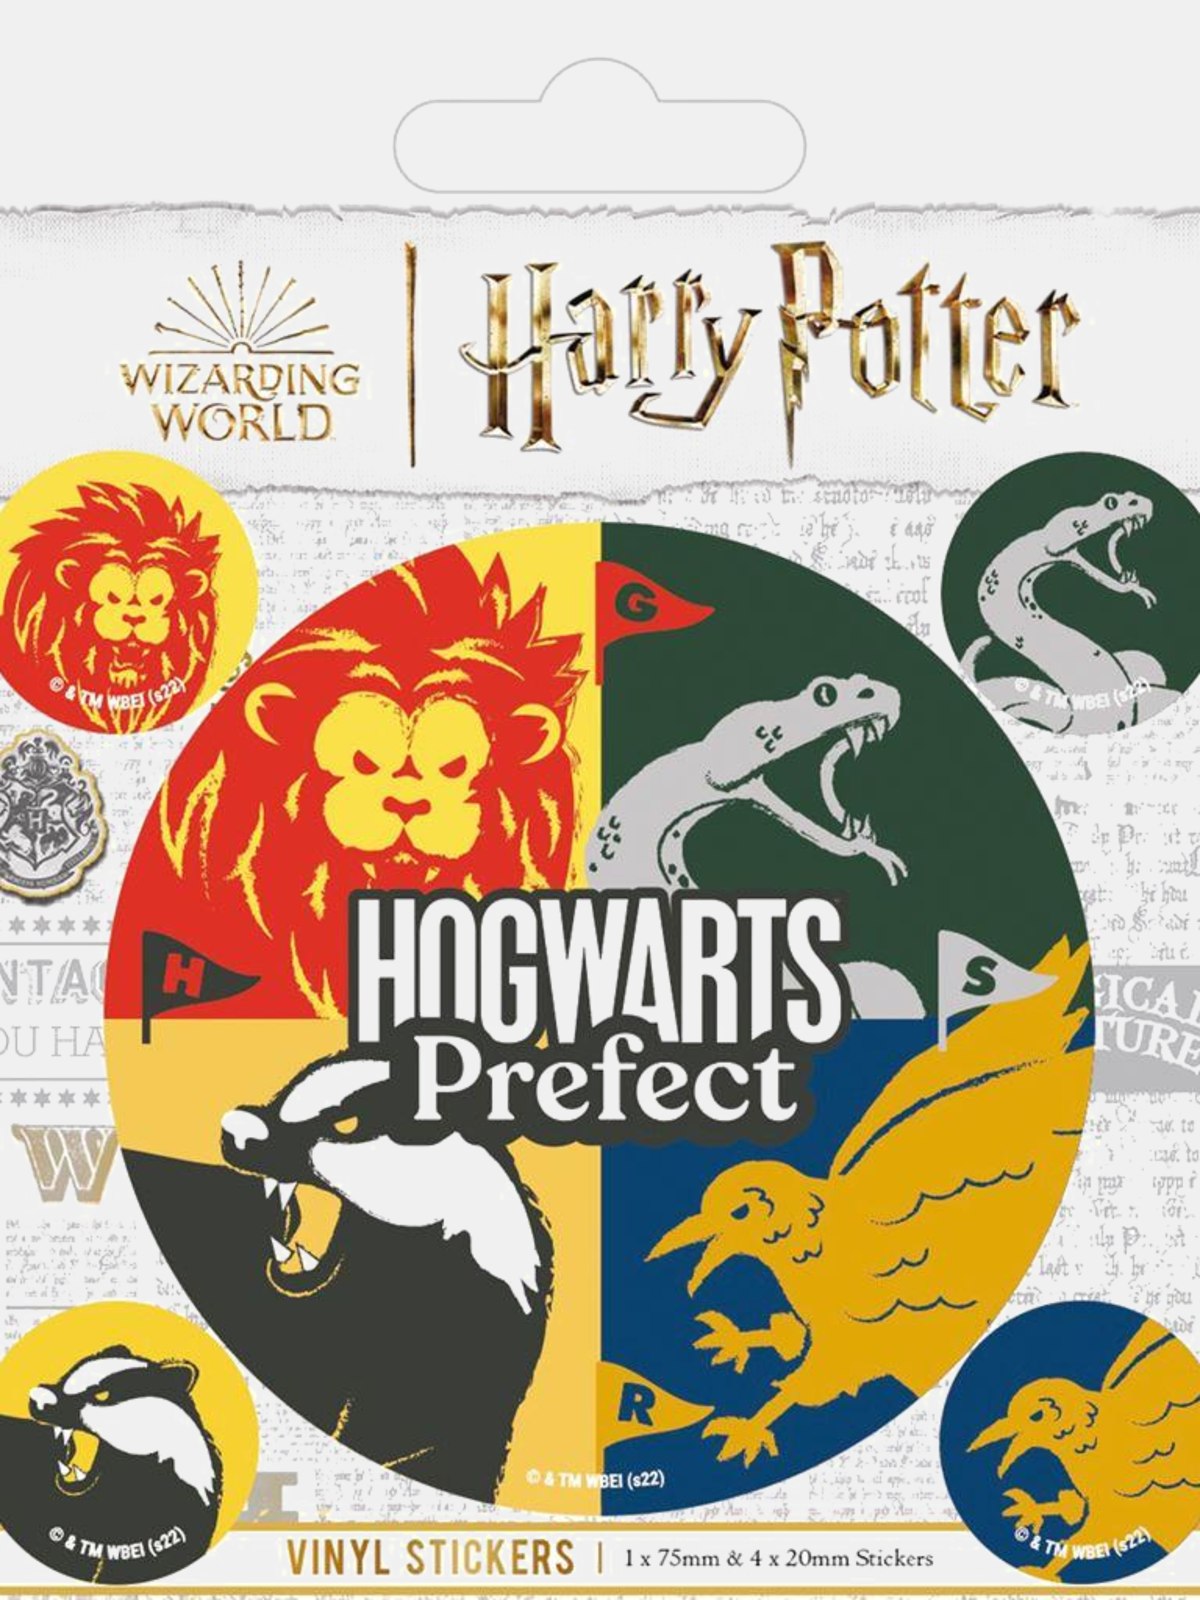 Harry Potter Hogwarts Houses Sticker Set Of 5 Vinyl Stickers Decals Official